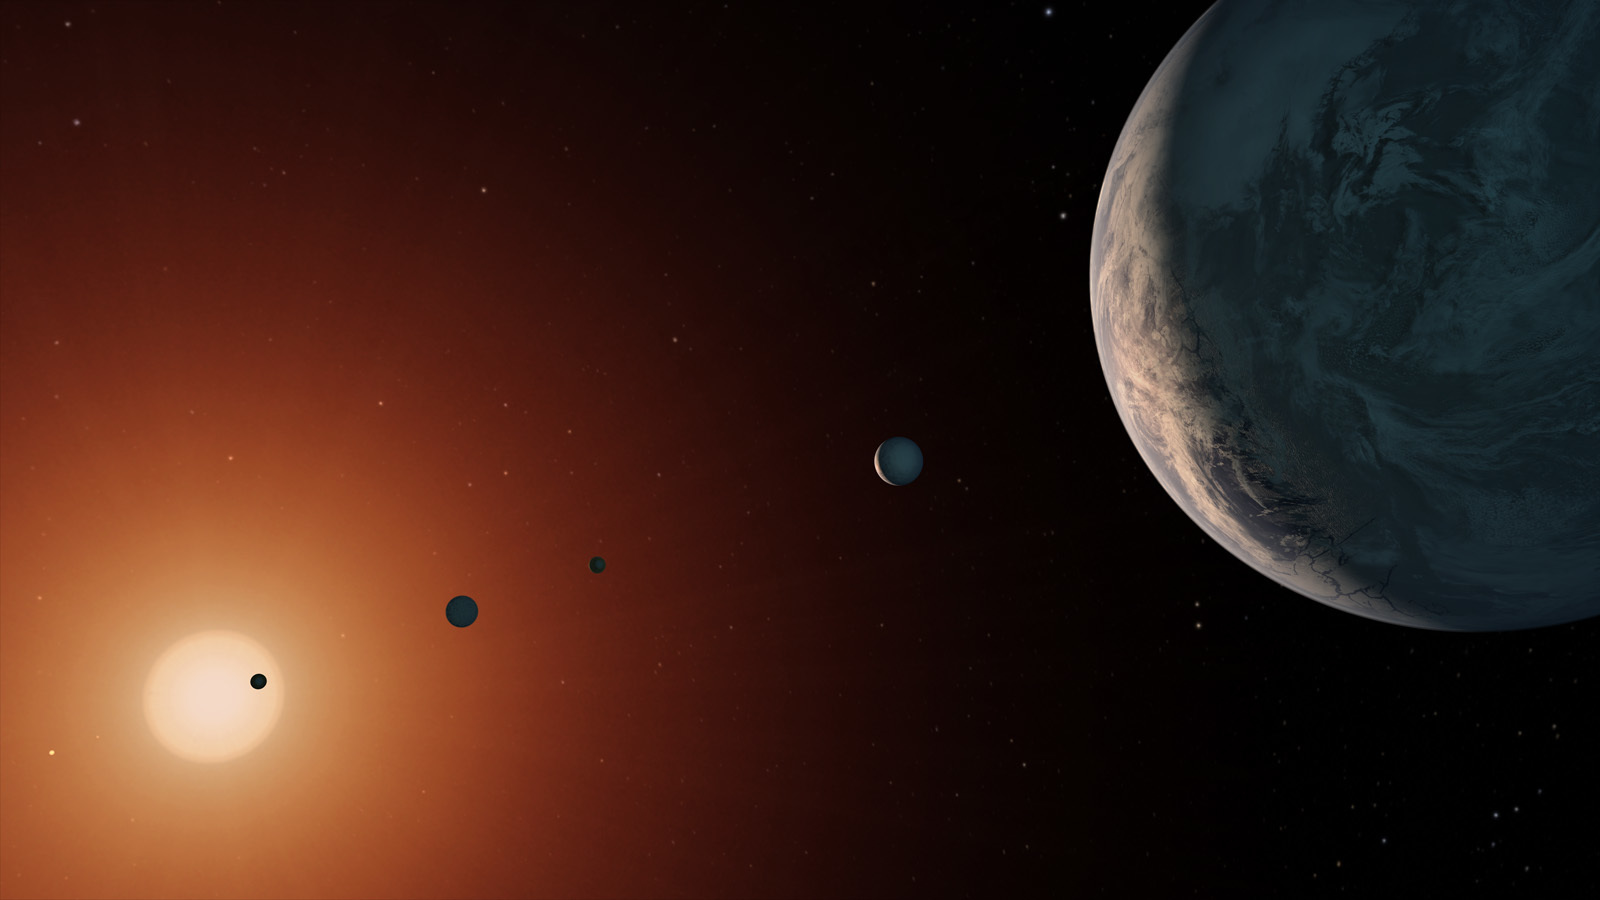 Illustration of TRAPPIST-1 system from space.